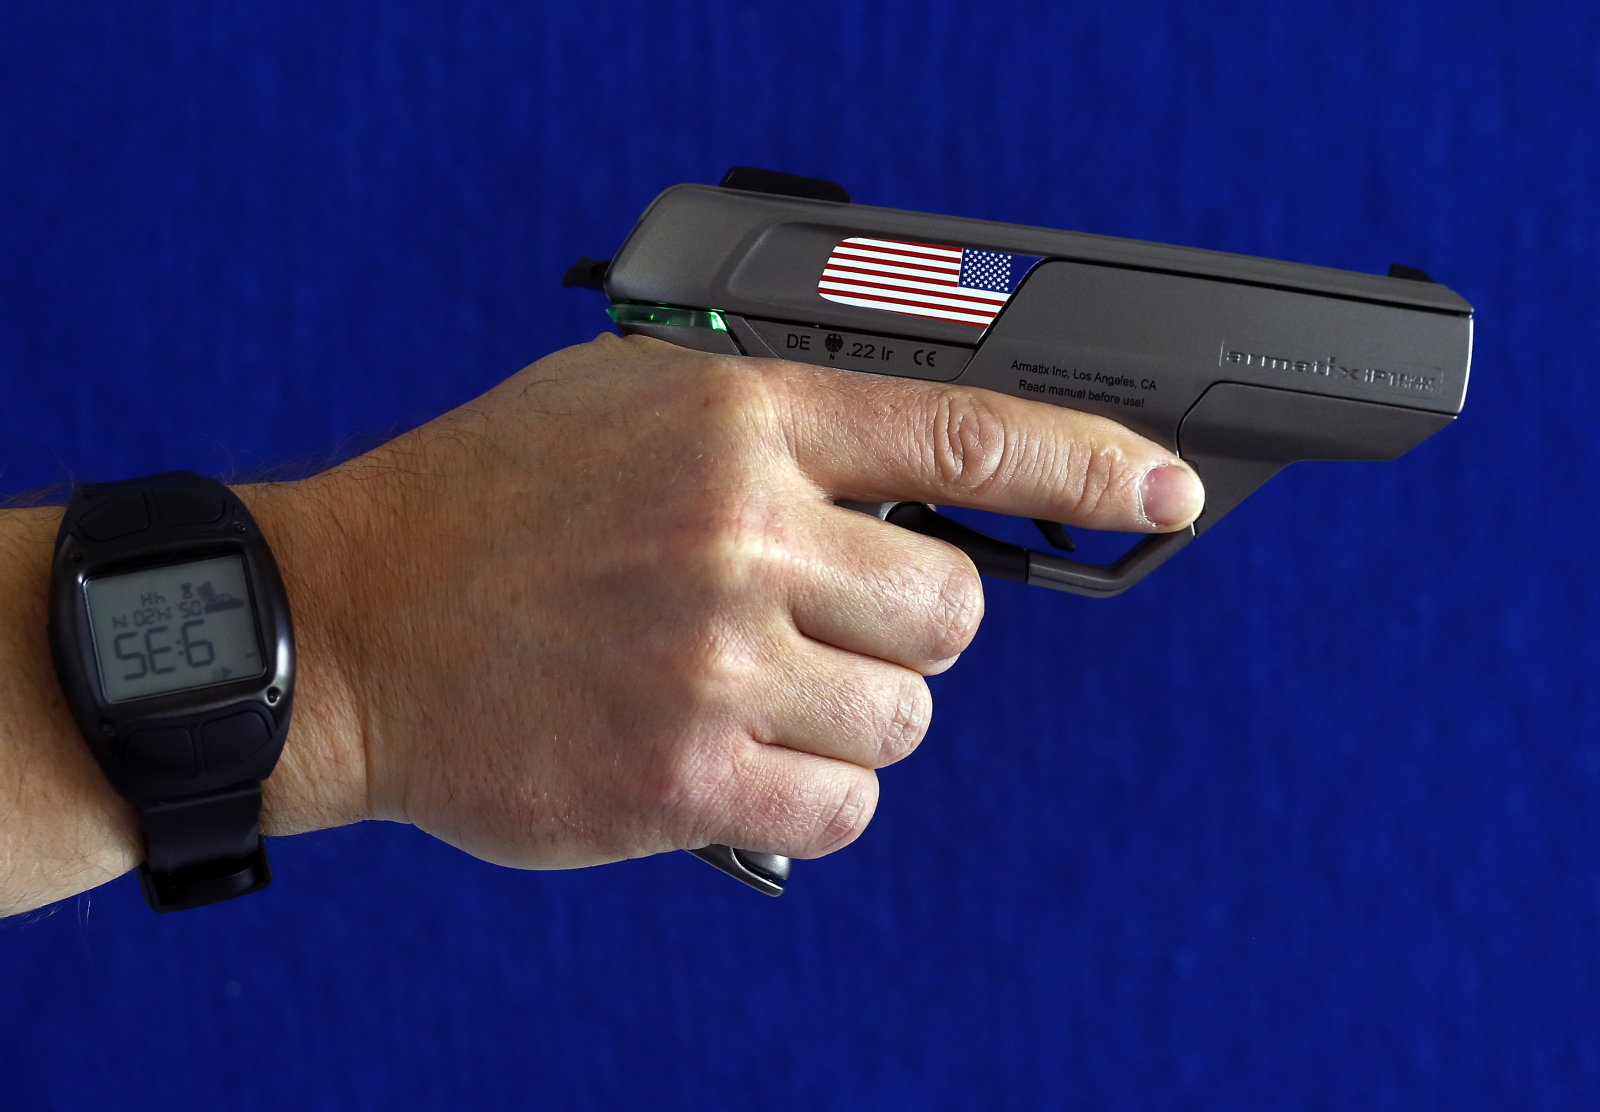 Official Guidelines for Smart-Guns from the U.S Government